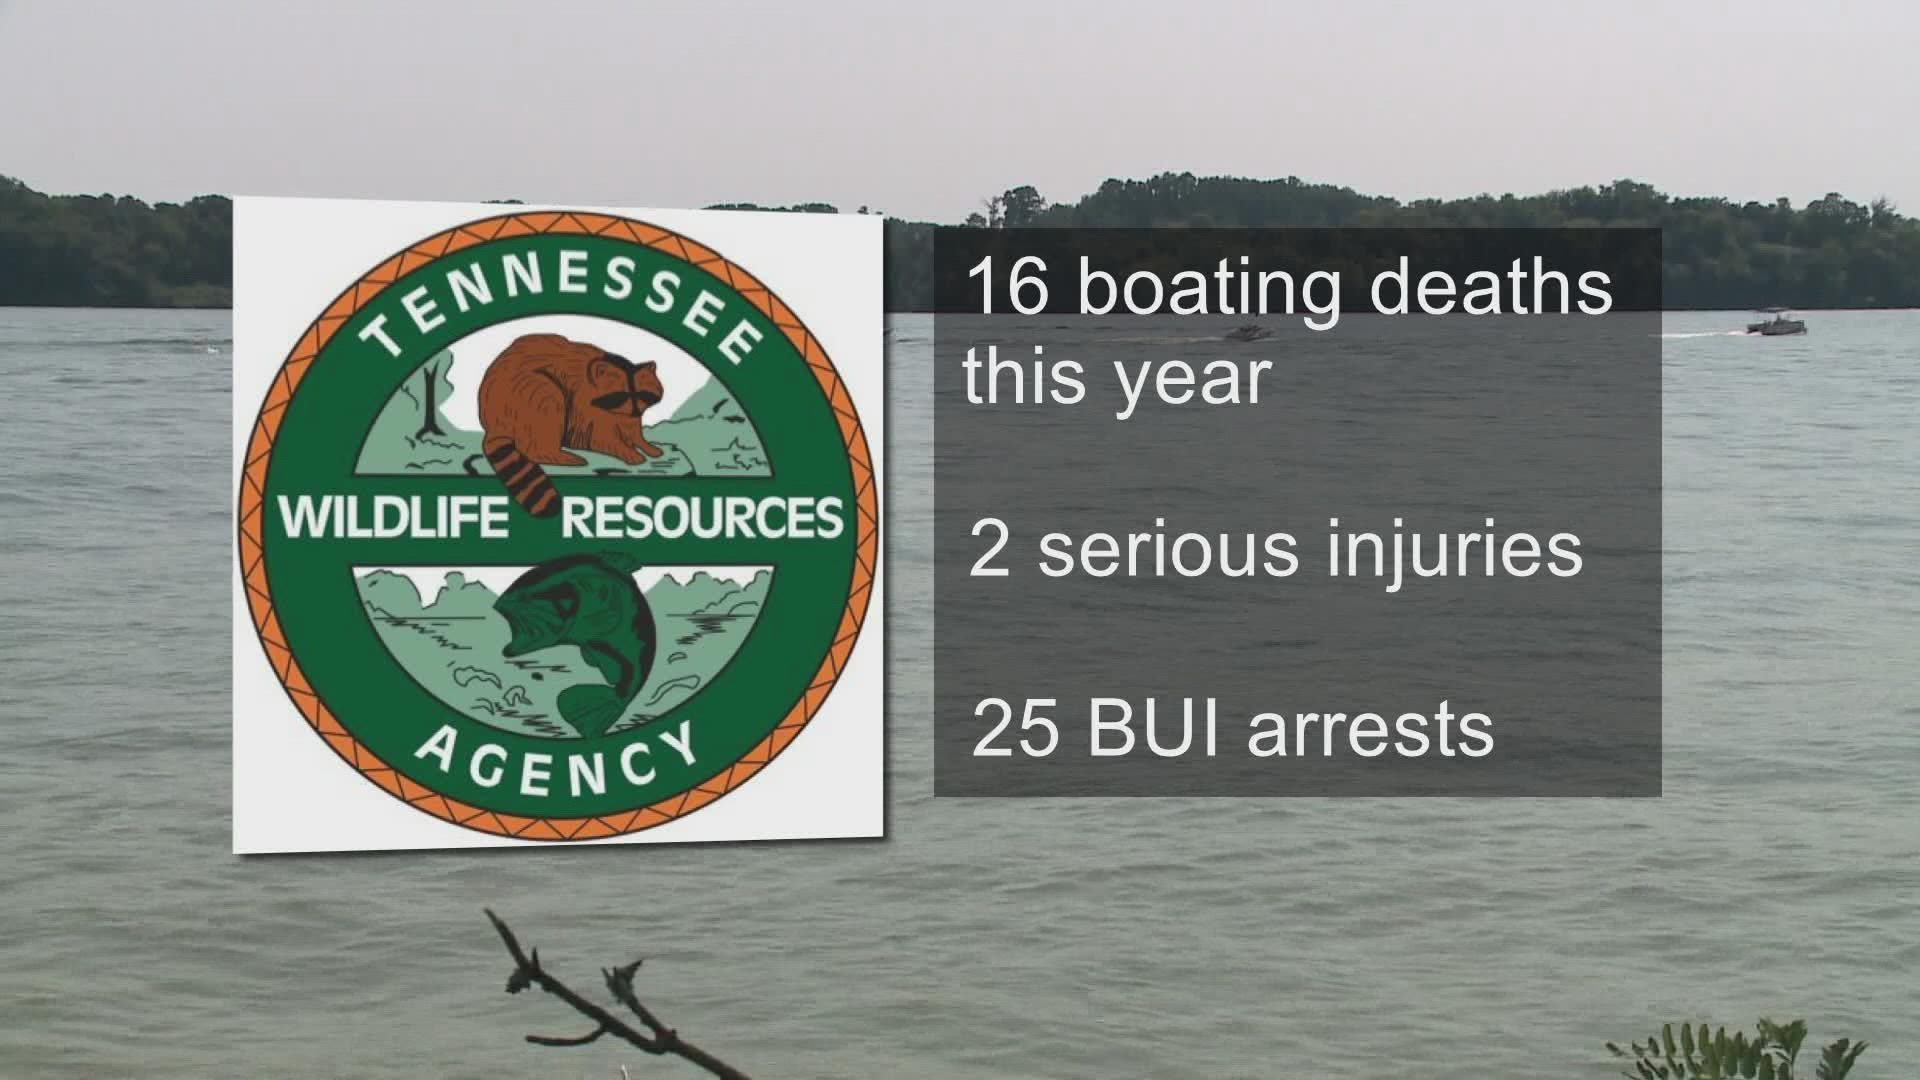 The Tennessee Wildlife Resources Agency said that eight arrests were made in the East Tennessee area.